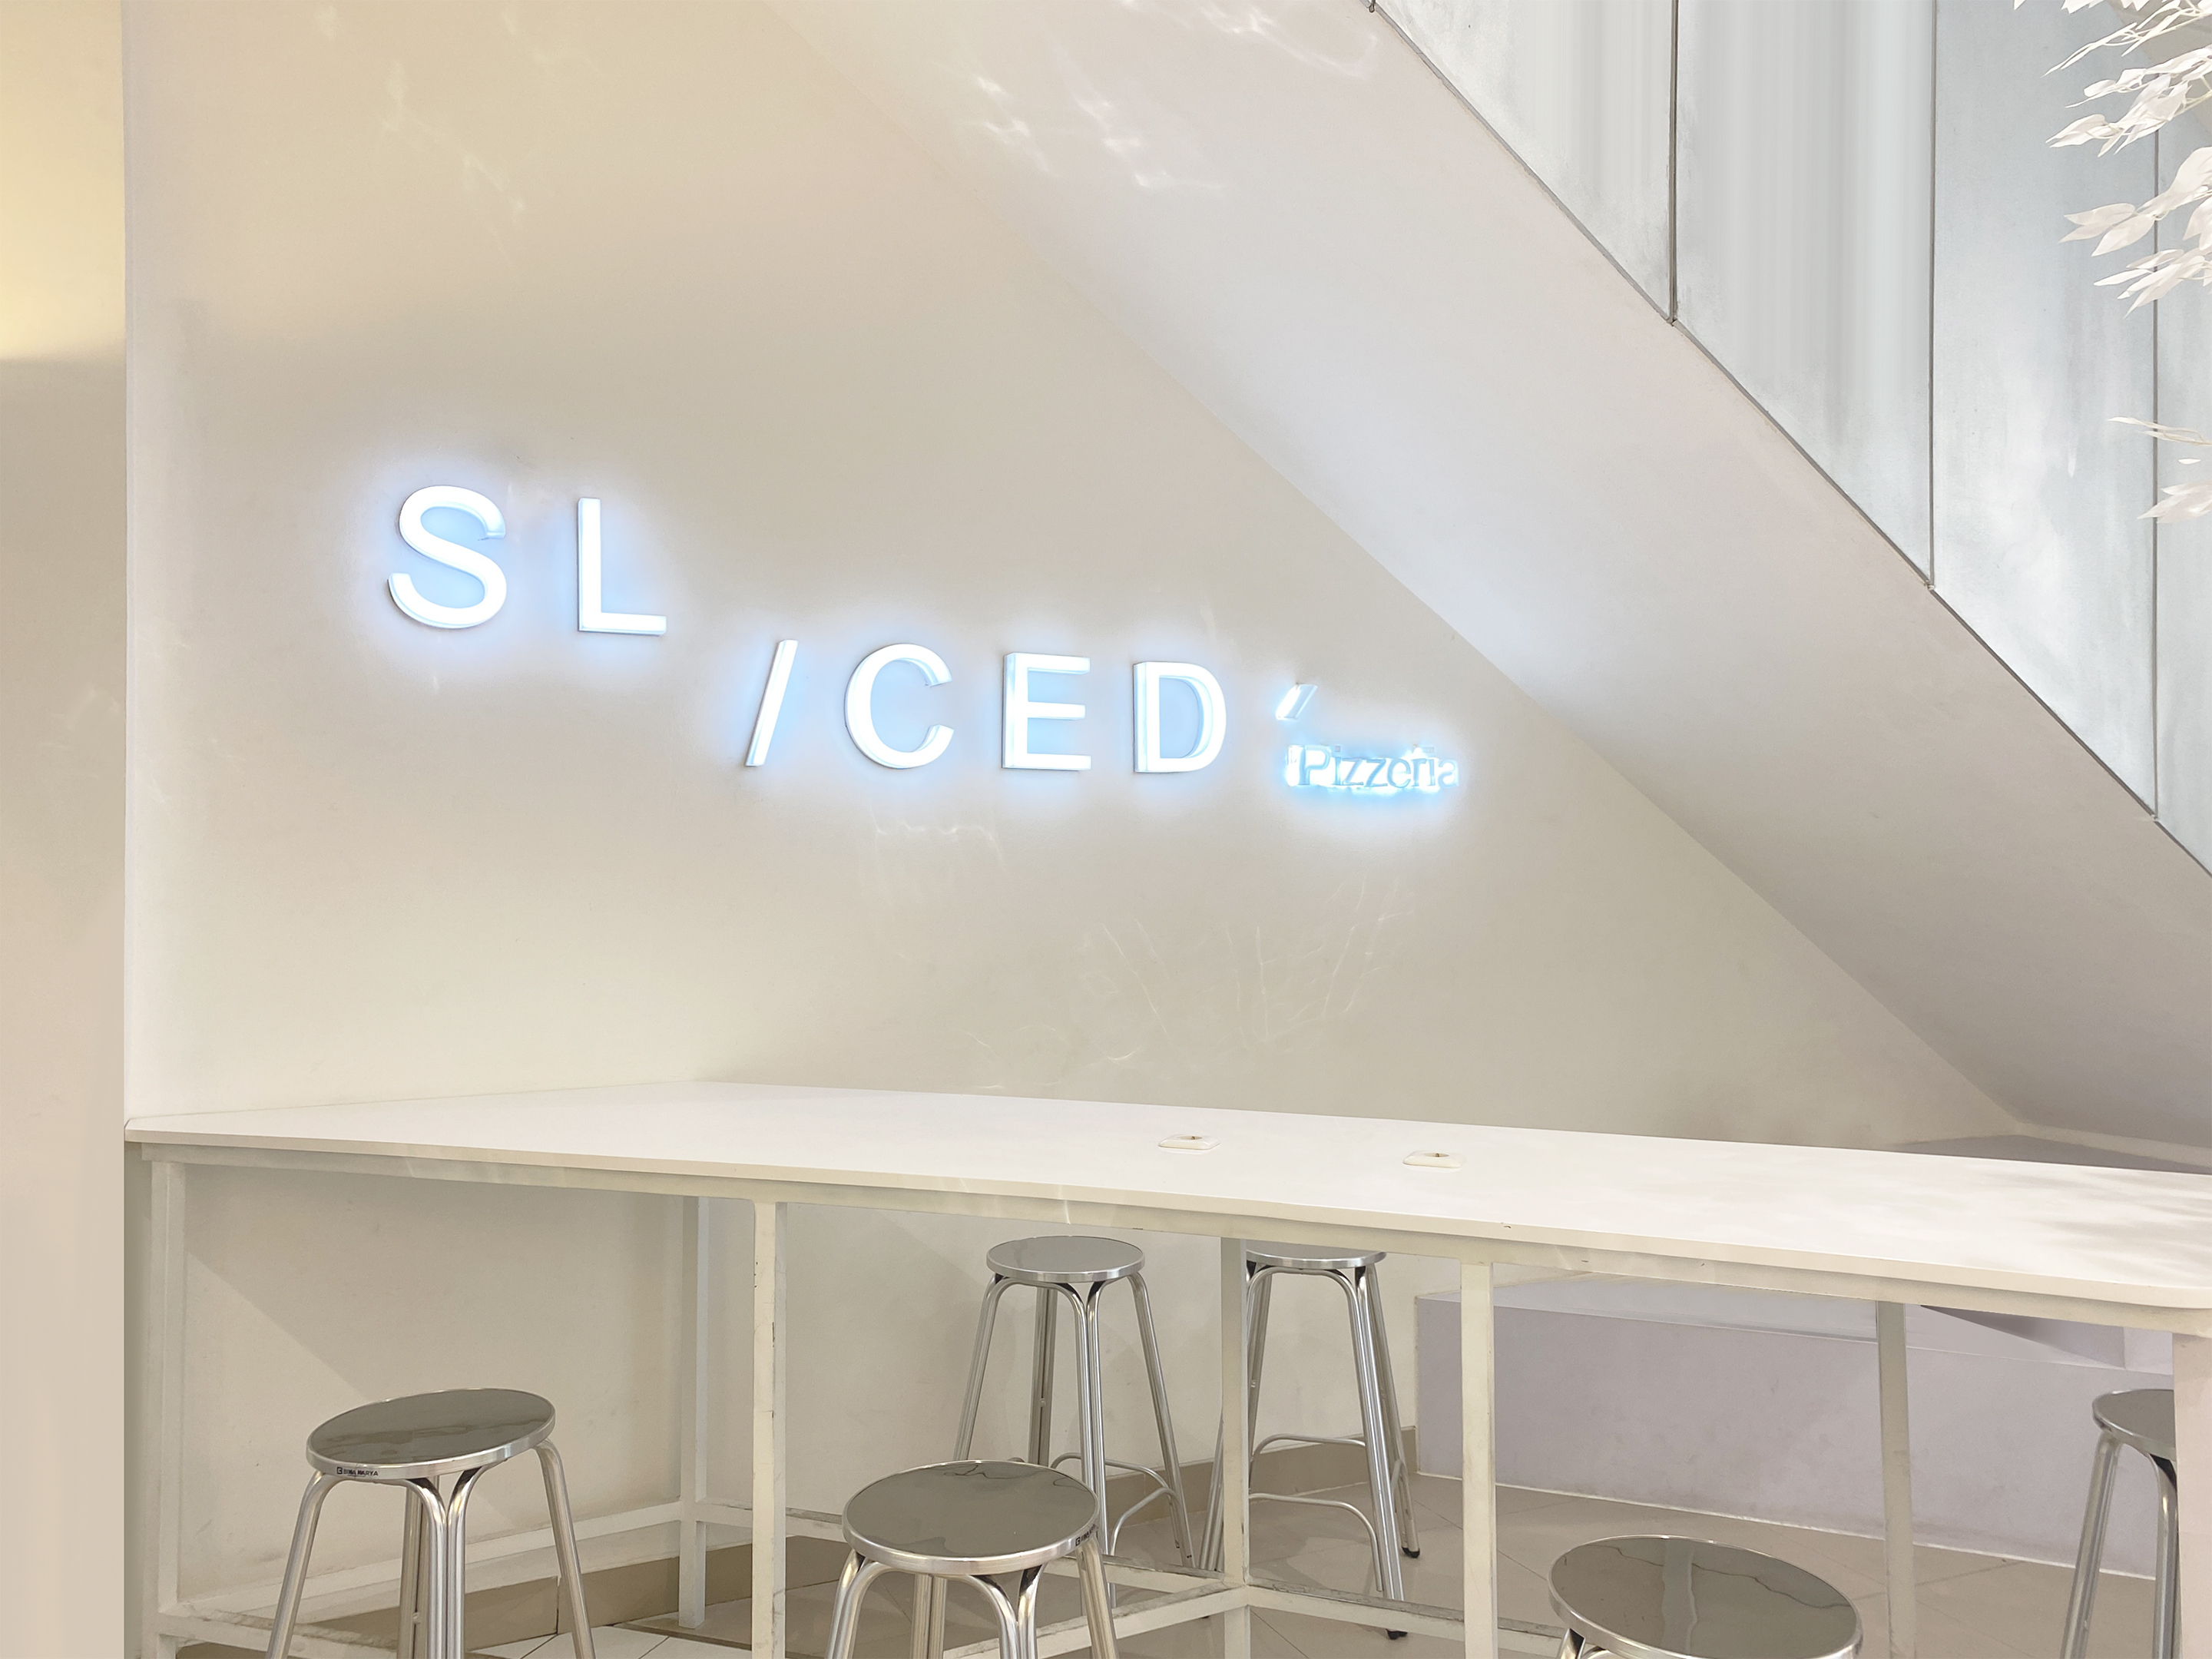 (Slice Pizza designed by Aaksen Responsible Aarchitecture)